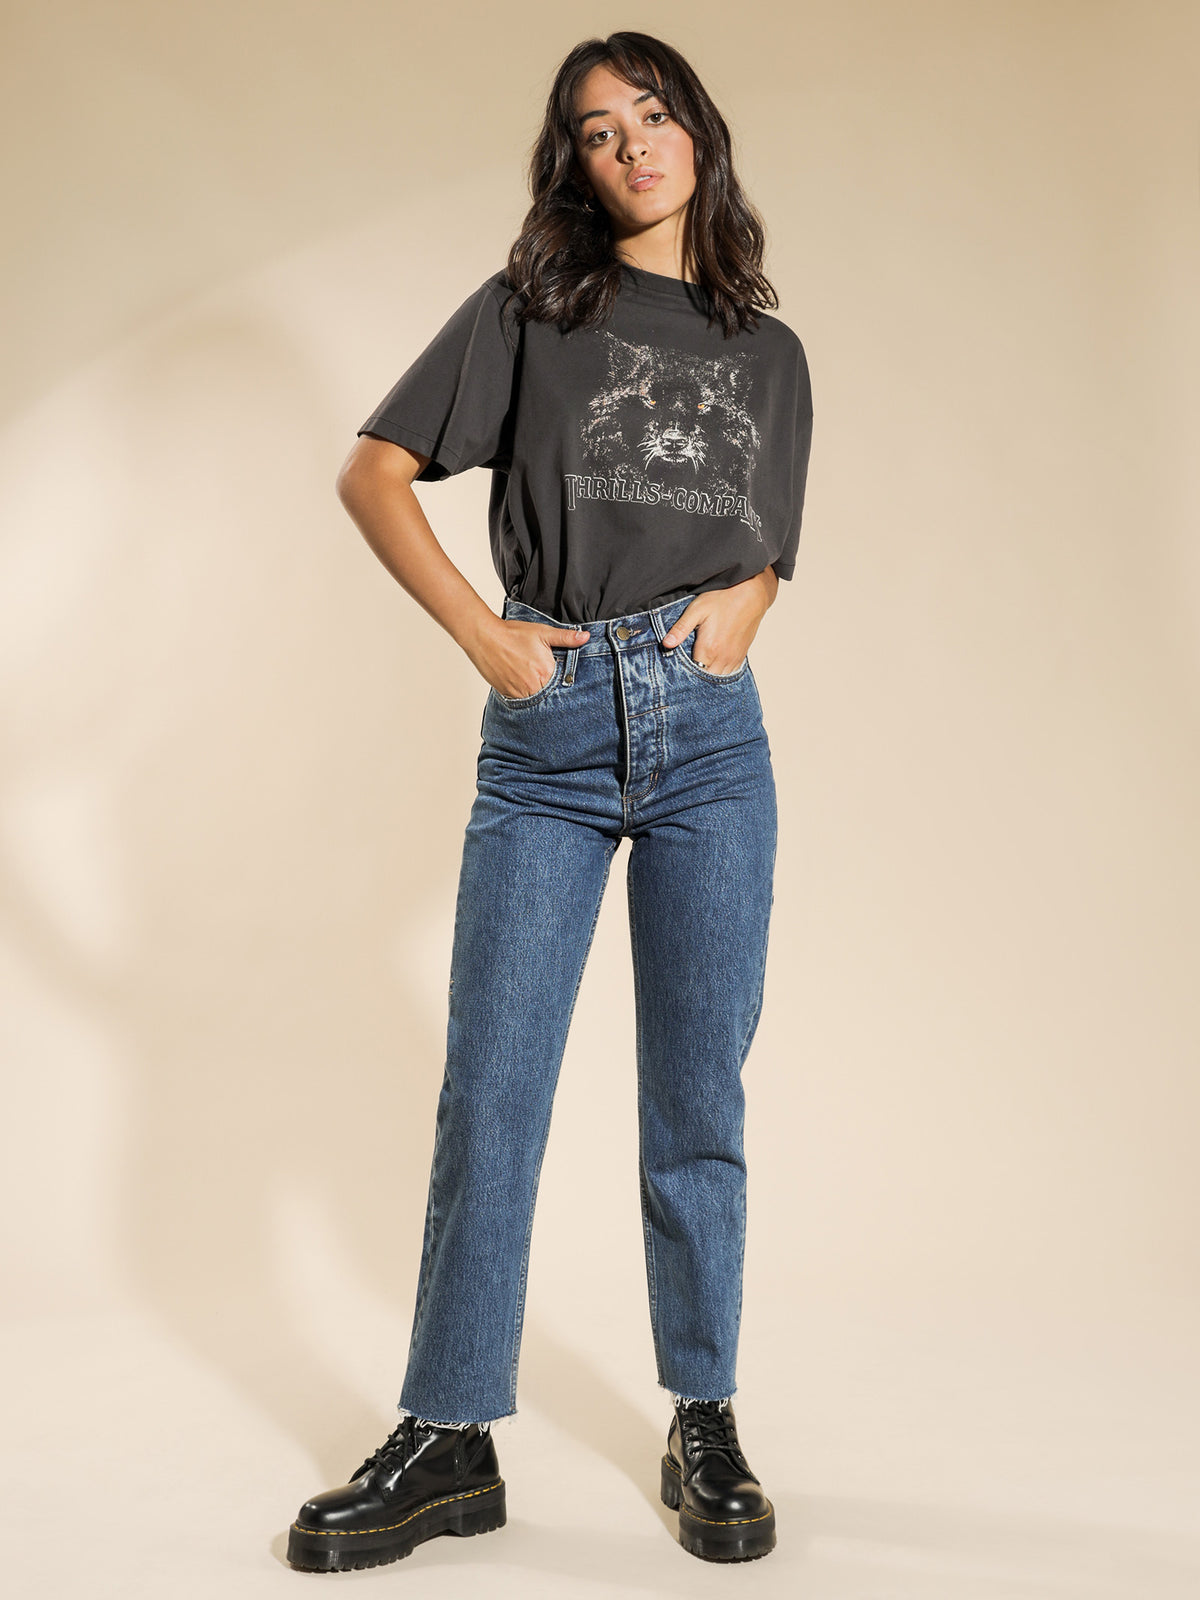 Paige Jeans in Blue Rinse